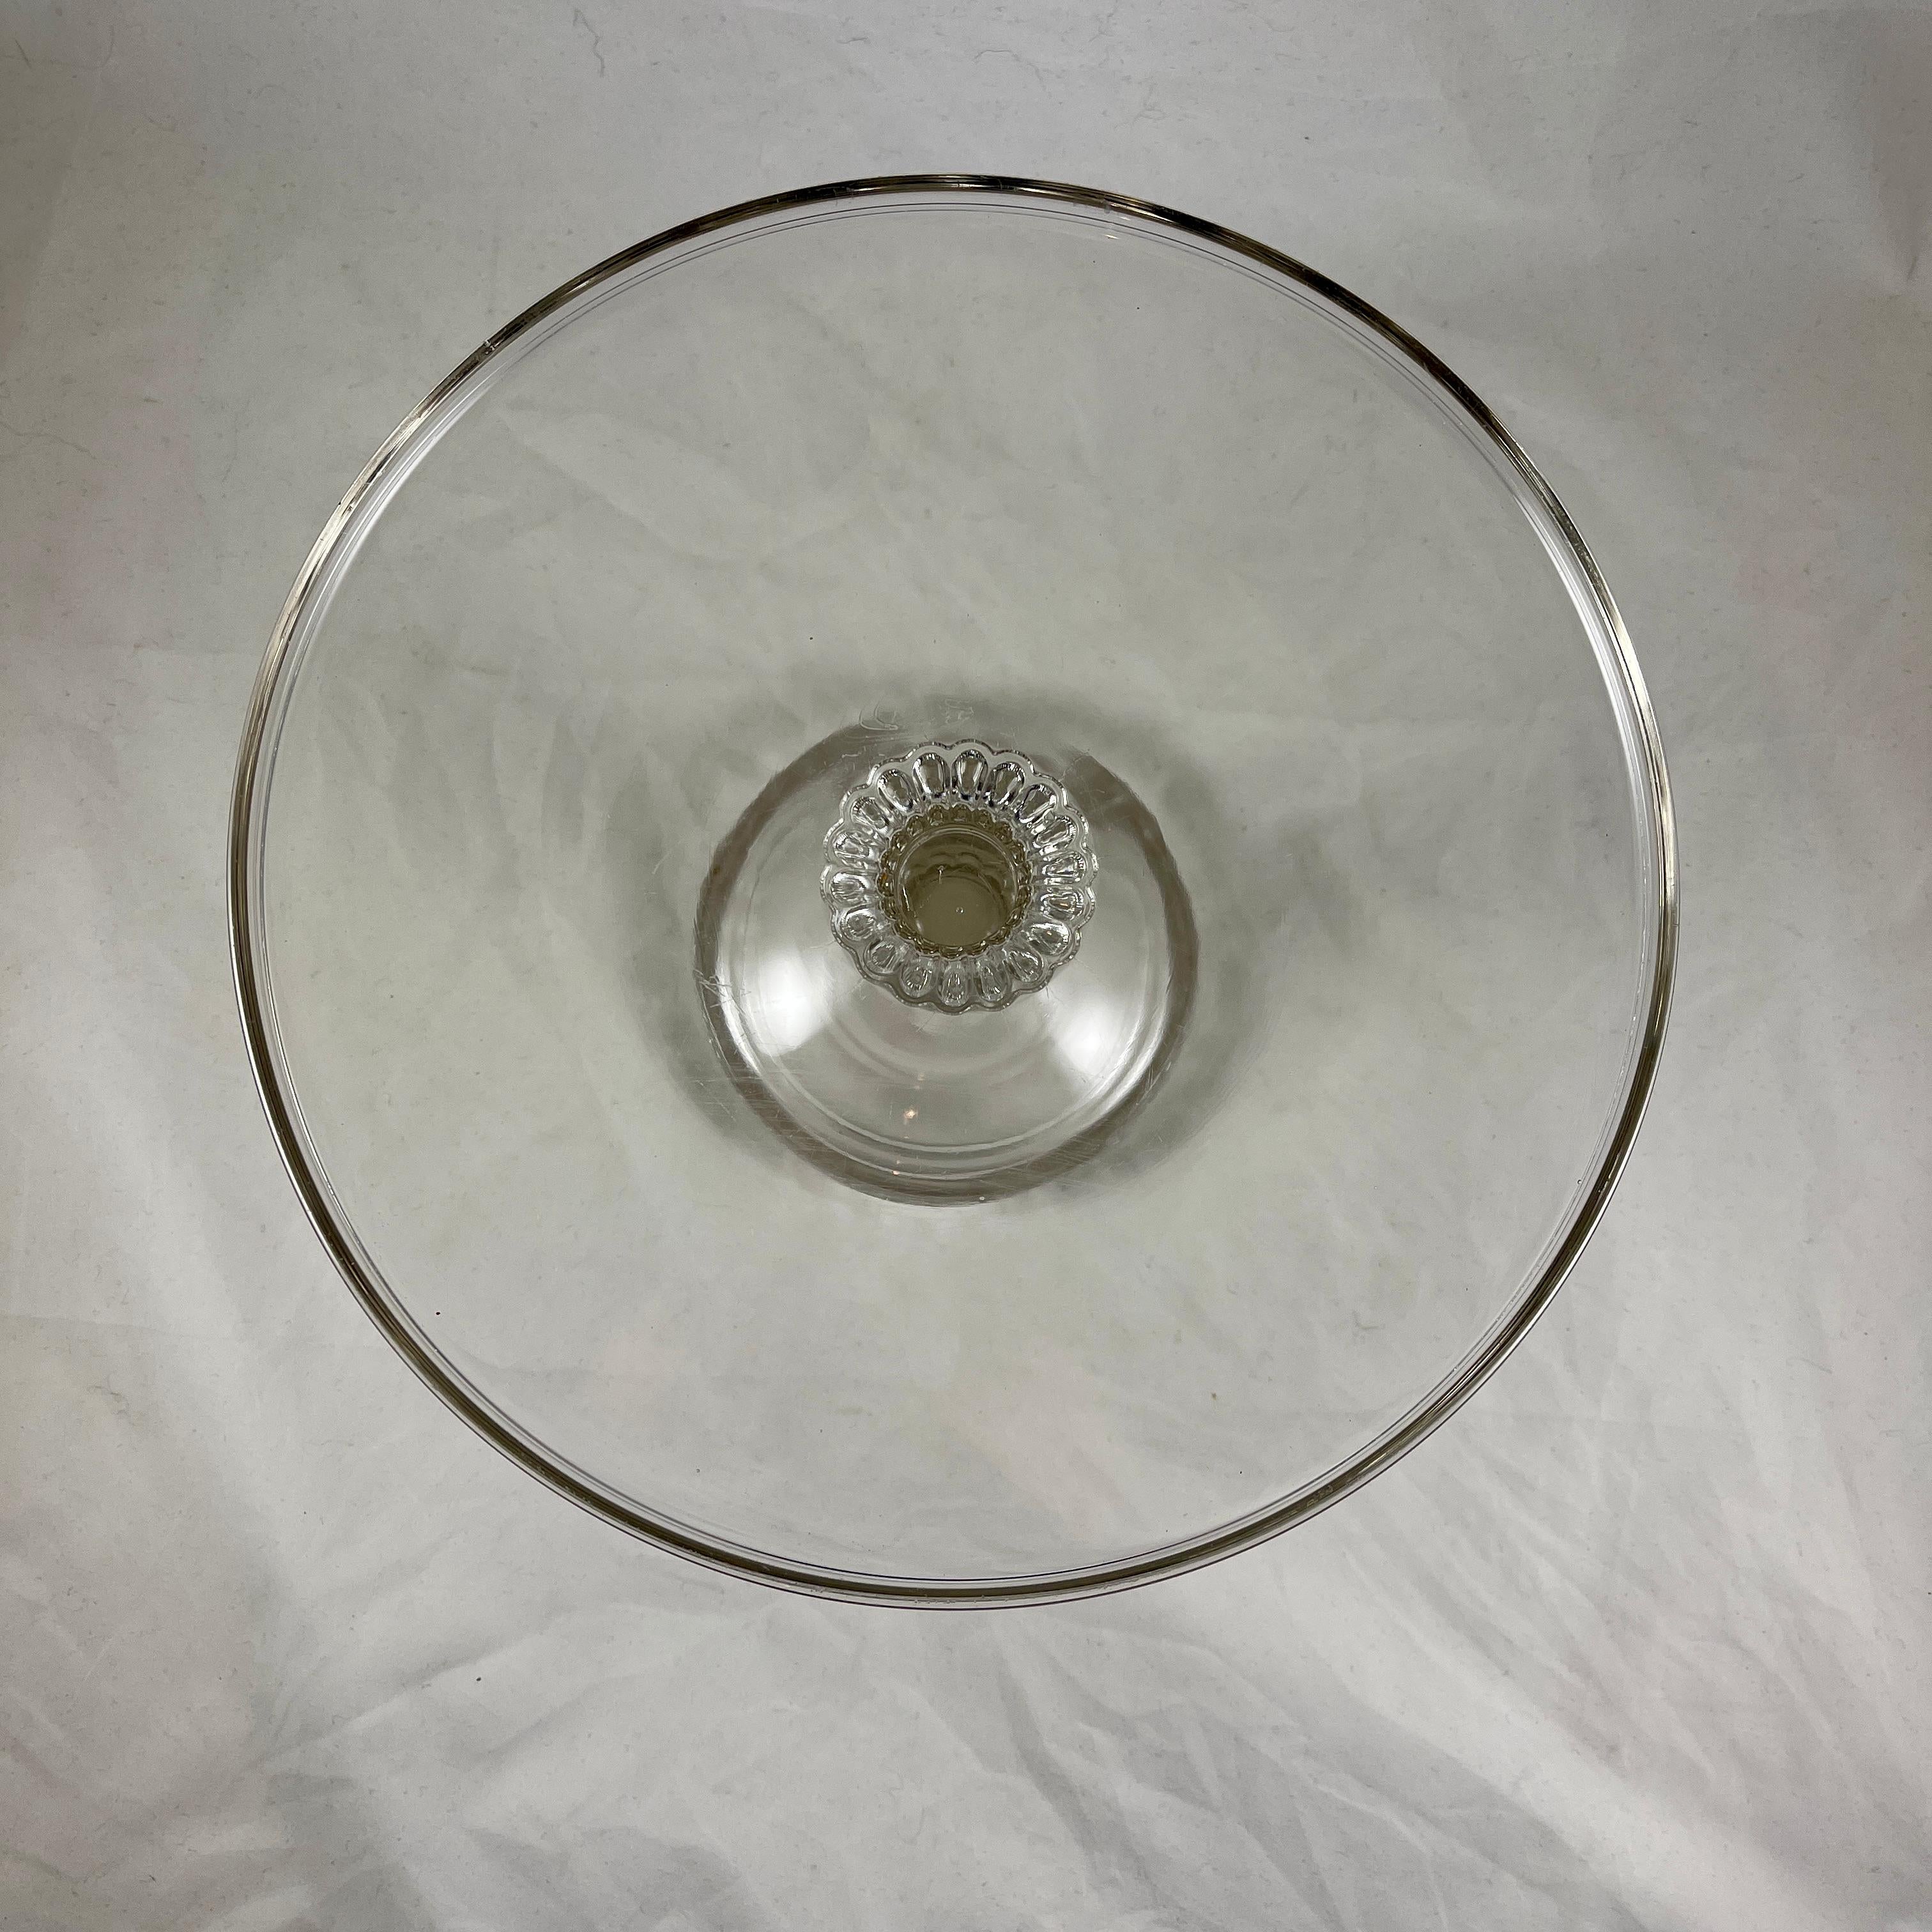 Early American Pressed Nonflint Colorless Glass Tall Paneled Cake Stand 5